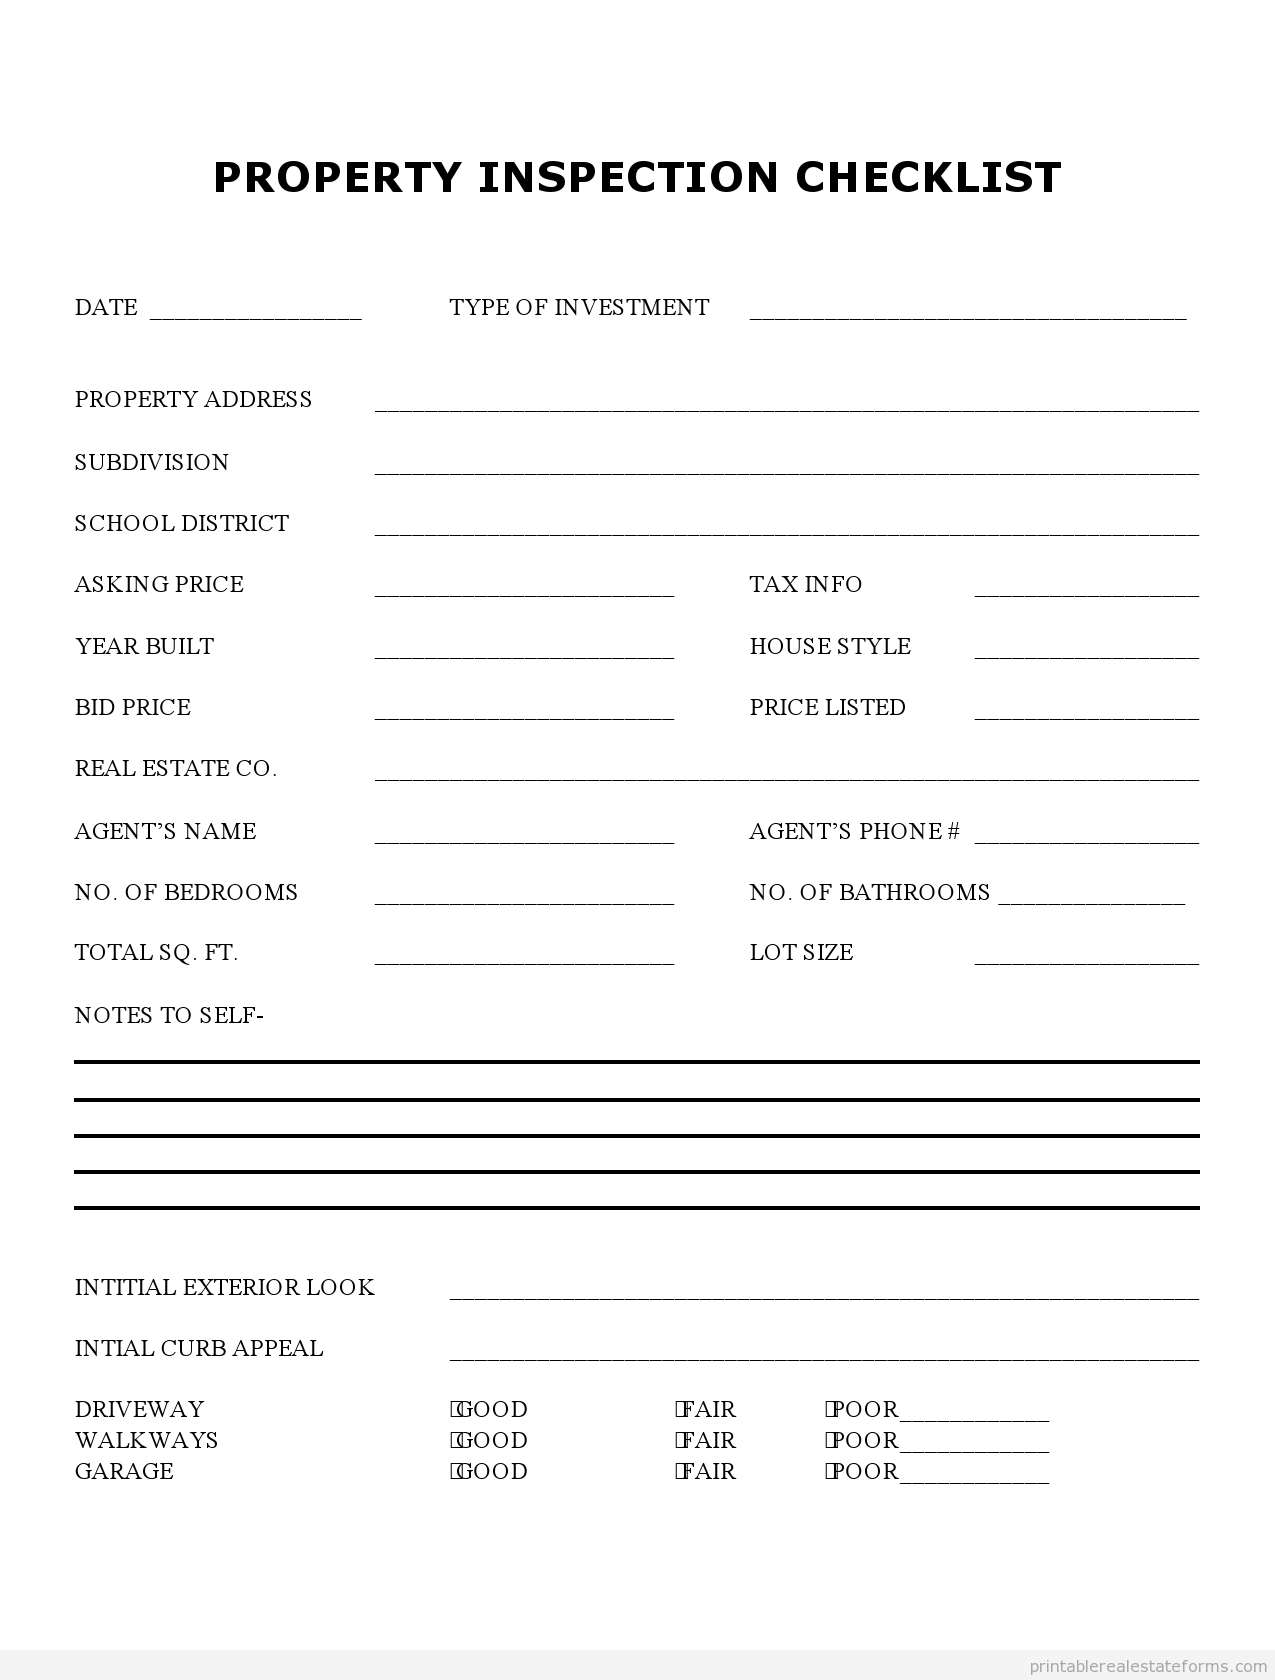 property-inspection-checklist-printable-real-estate-forms